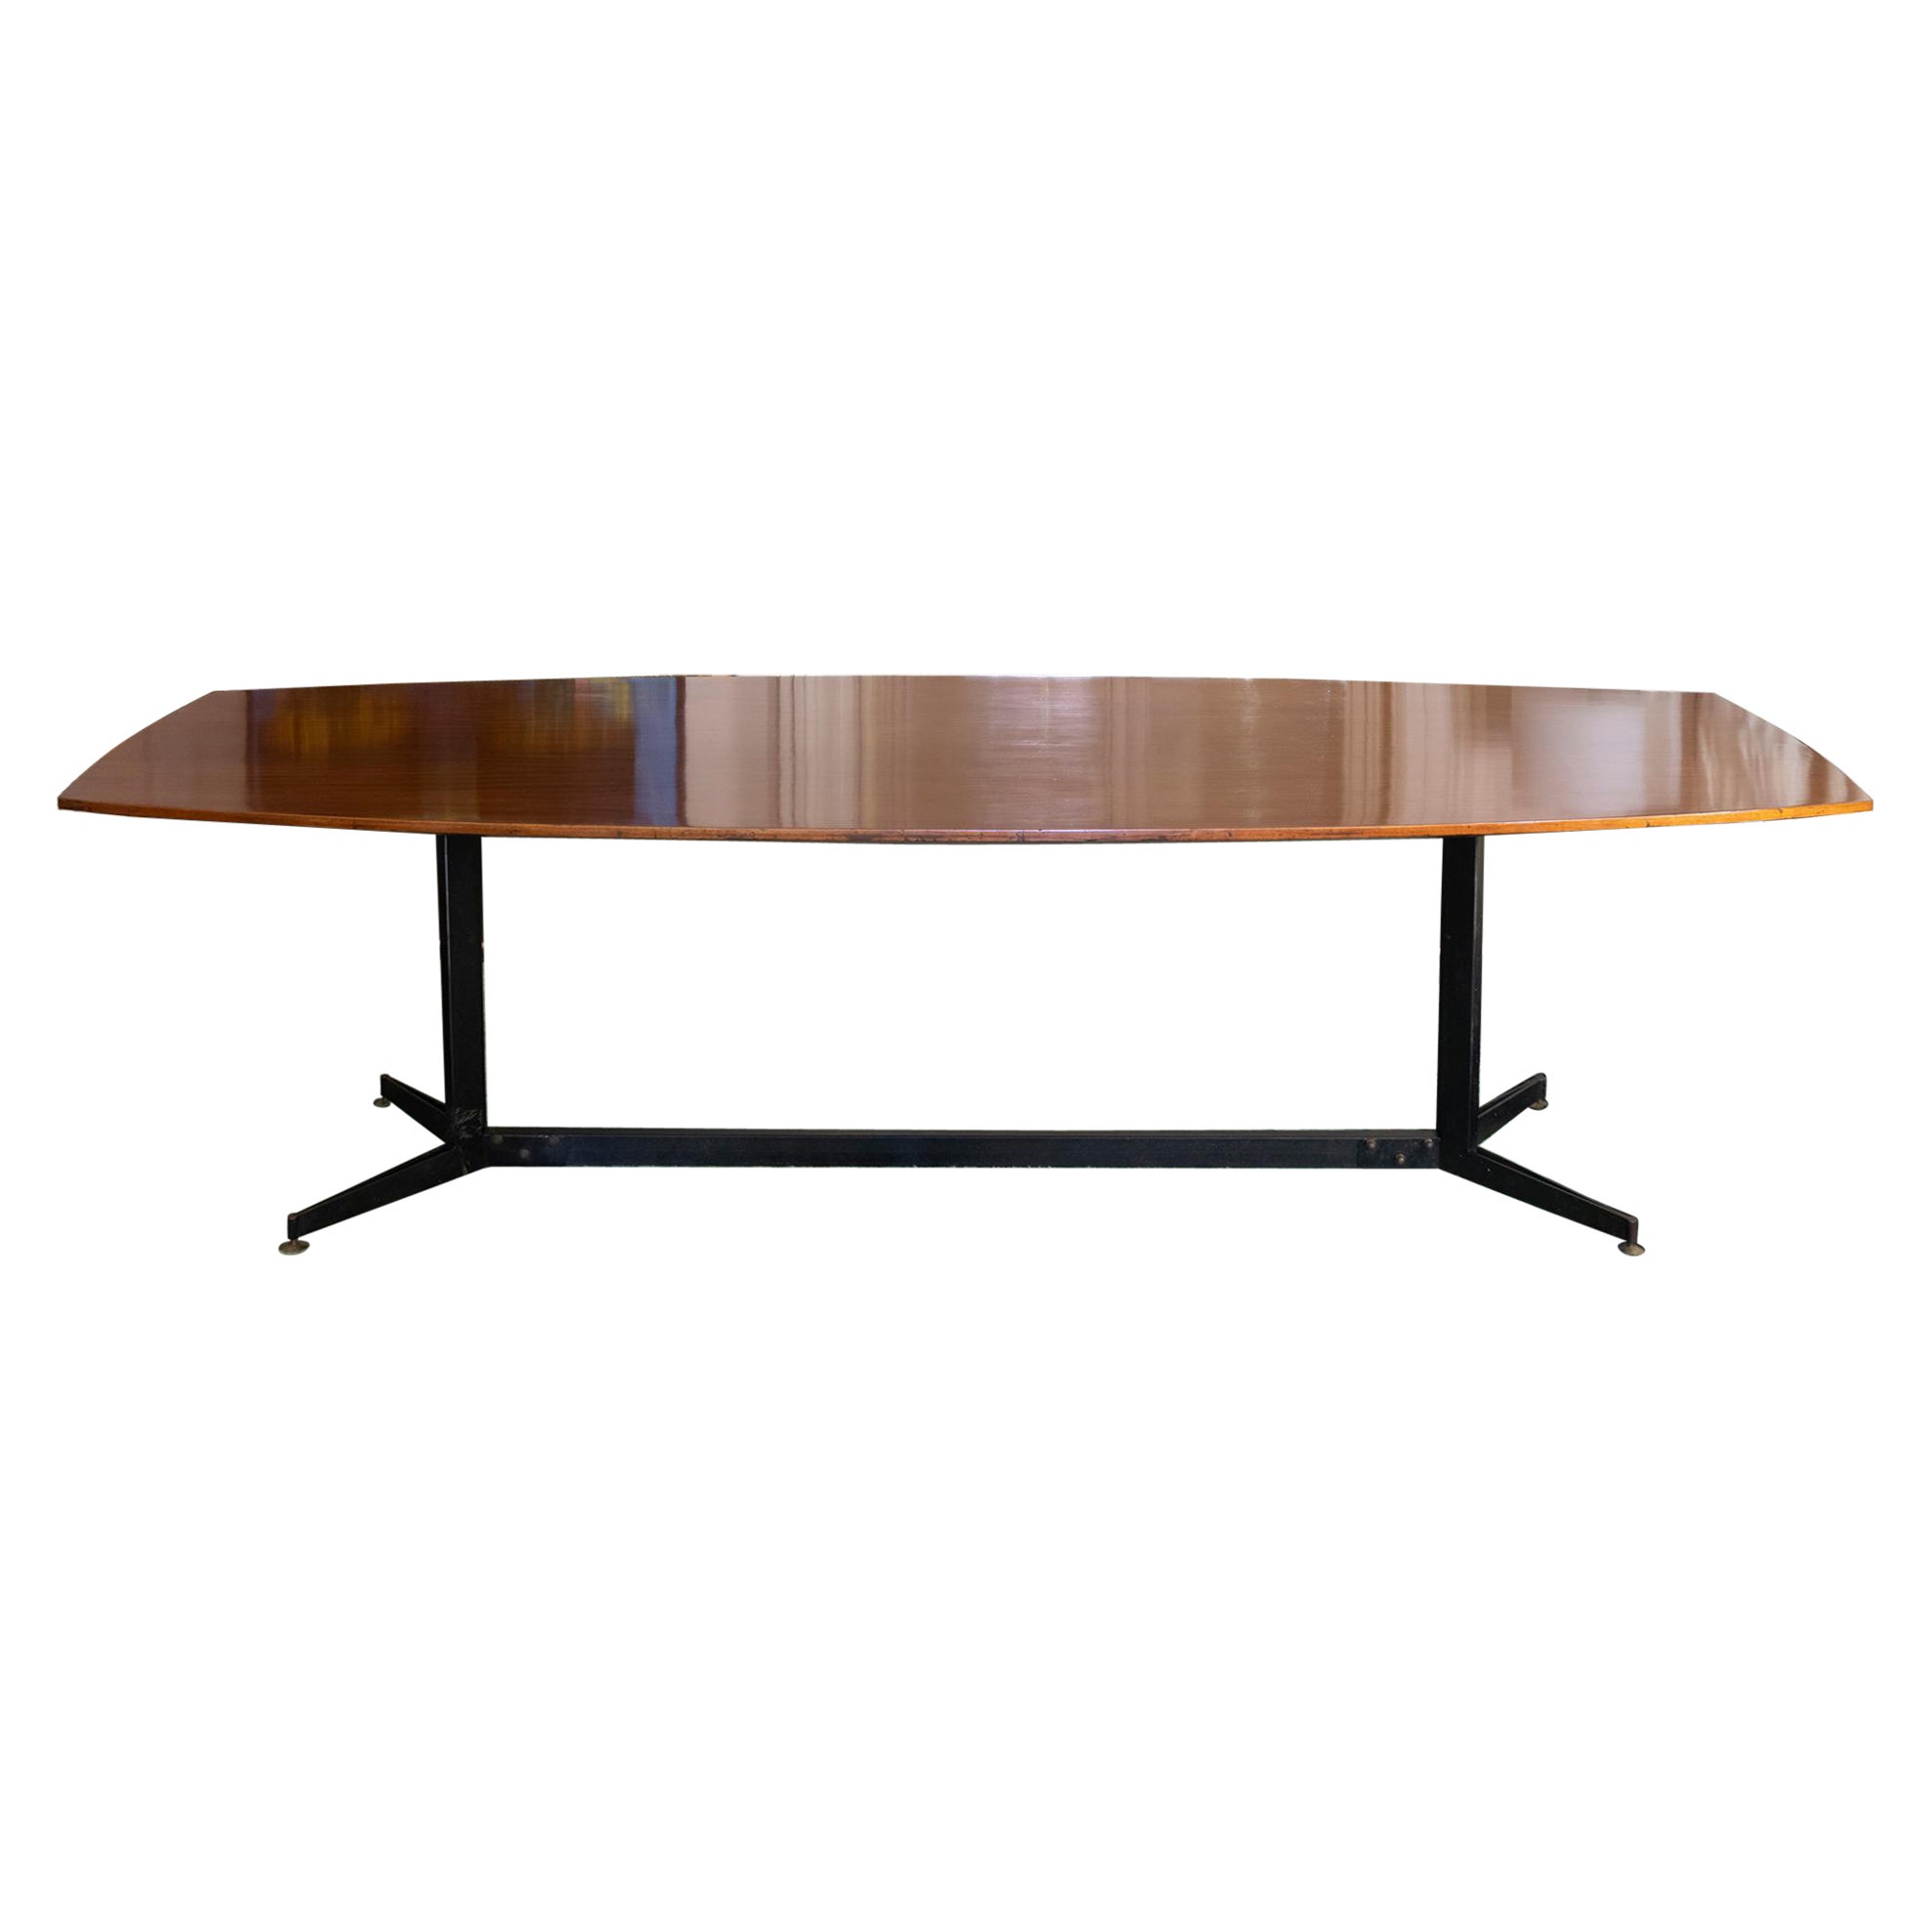 Late 20th Century Modern Conference / Dining Table Solid Walnut and Steel Base For Sale